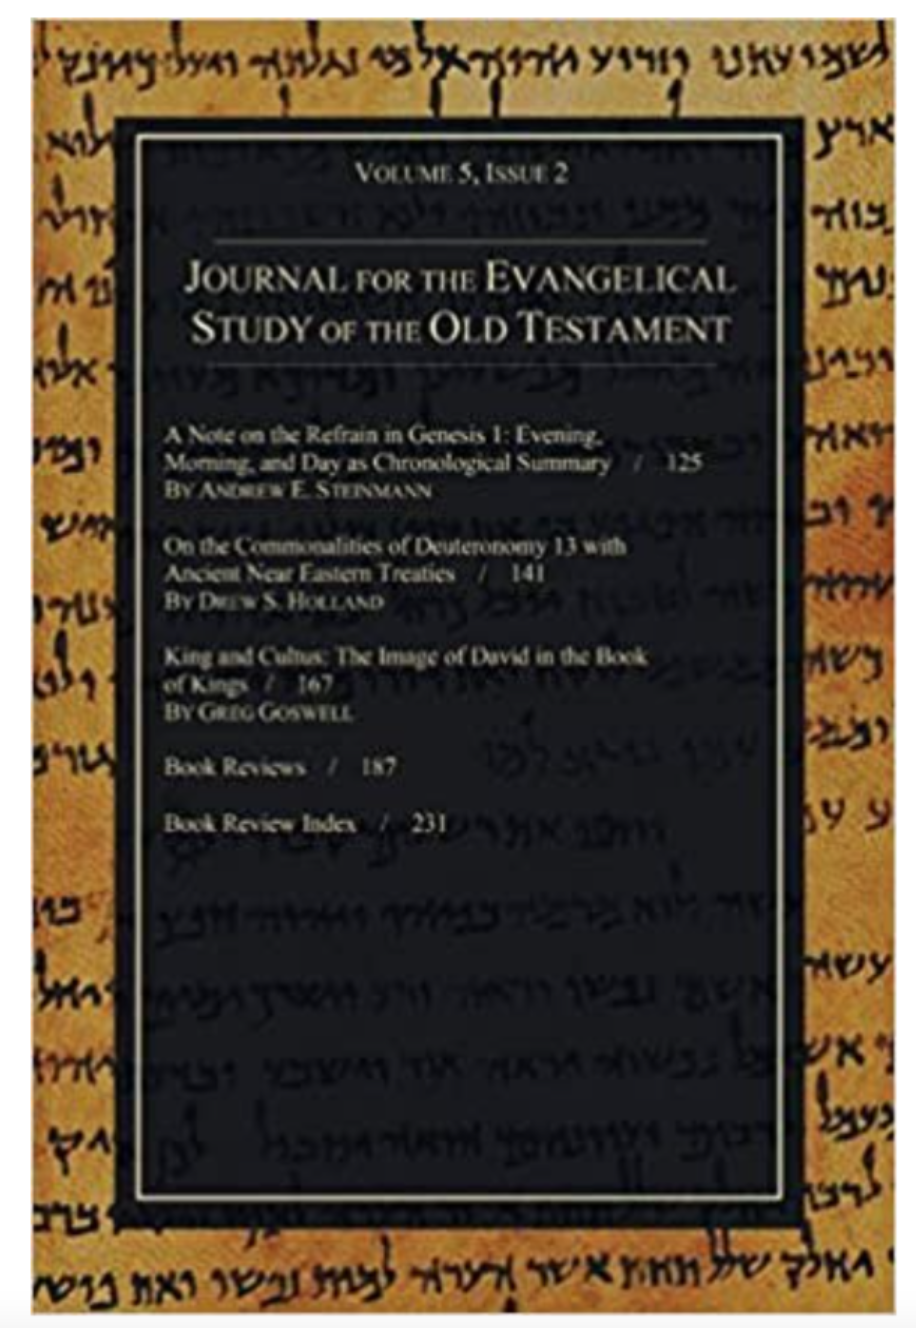 Journal for the Evangelical Study of the Old Testament 